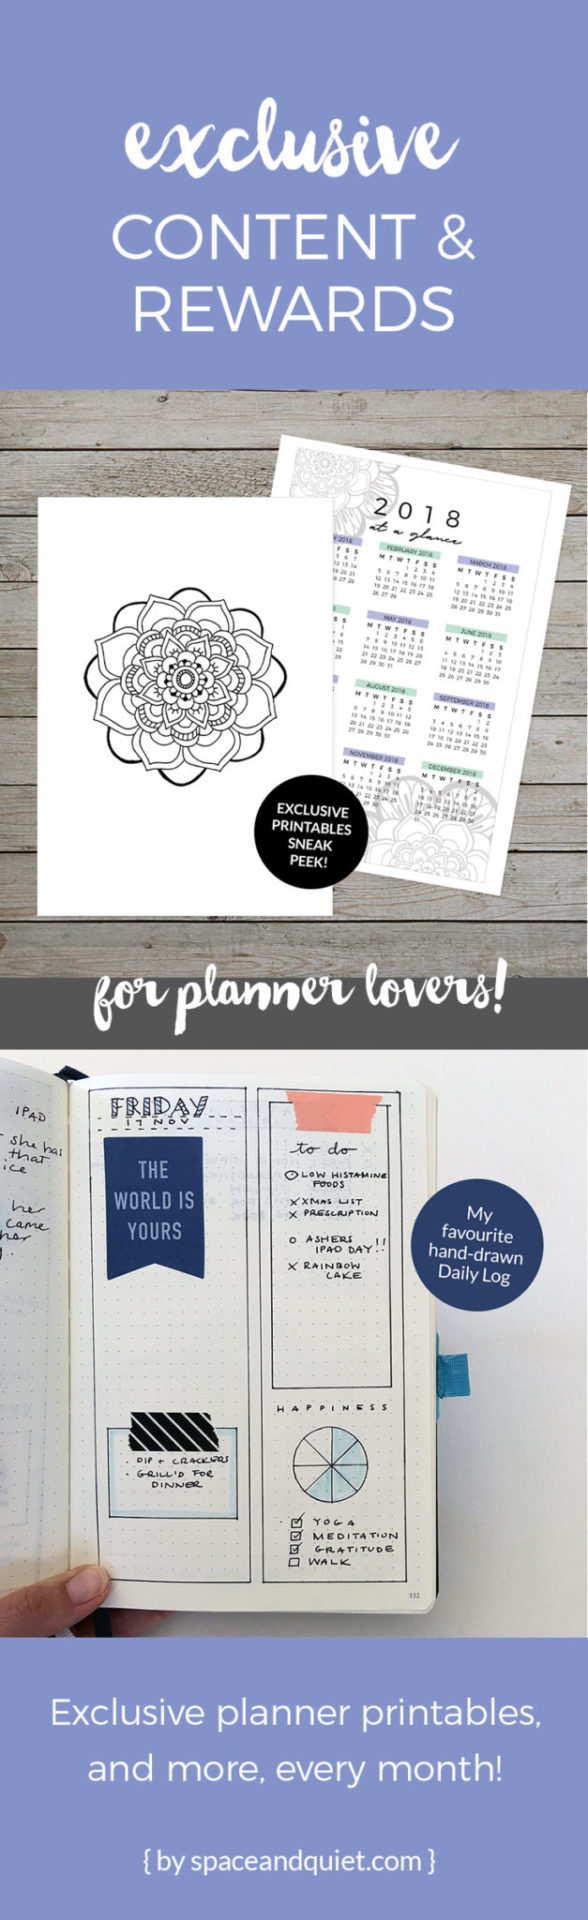 exclusive planner printables on patreon